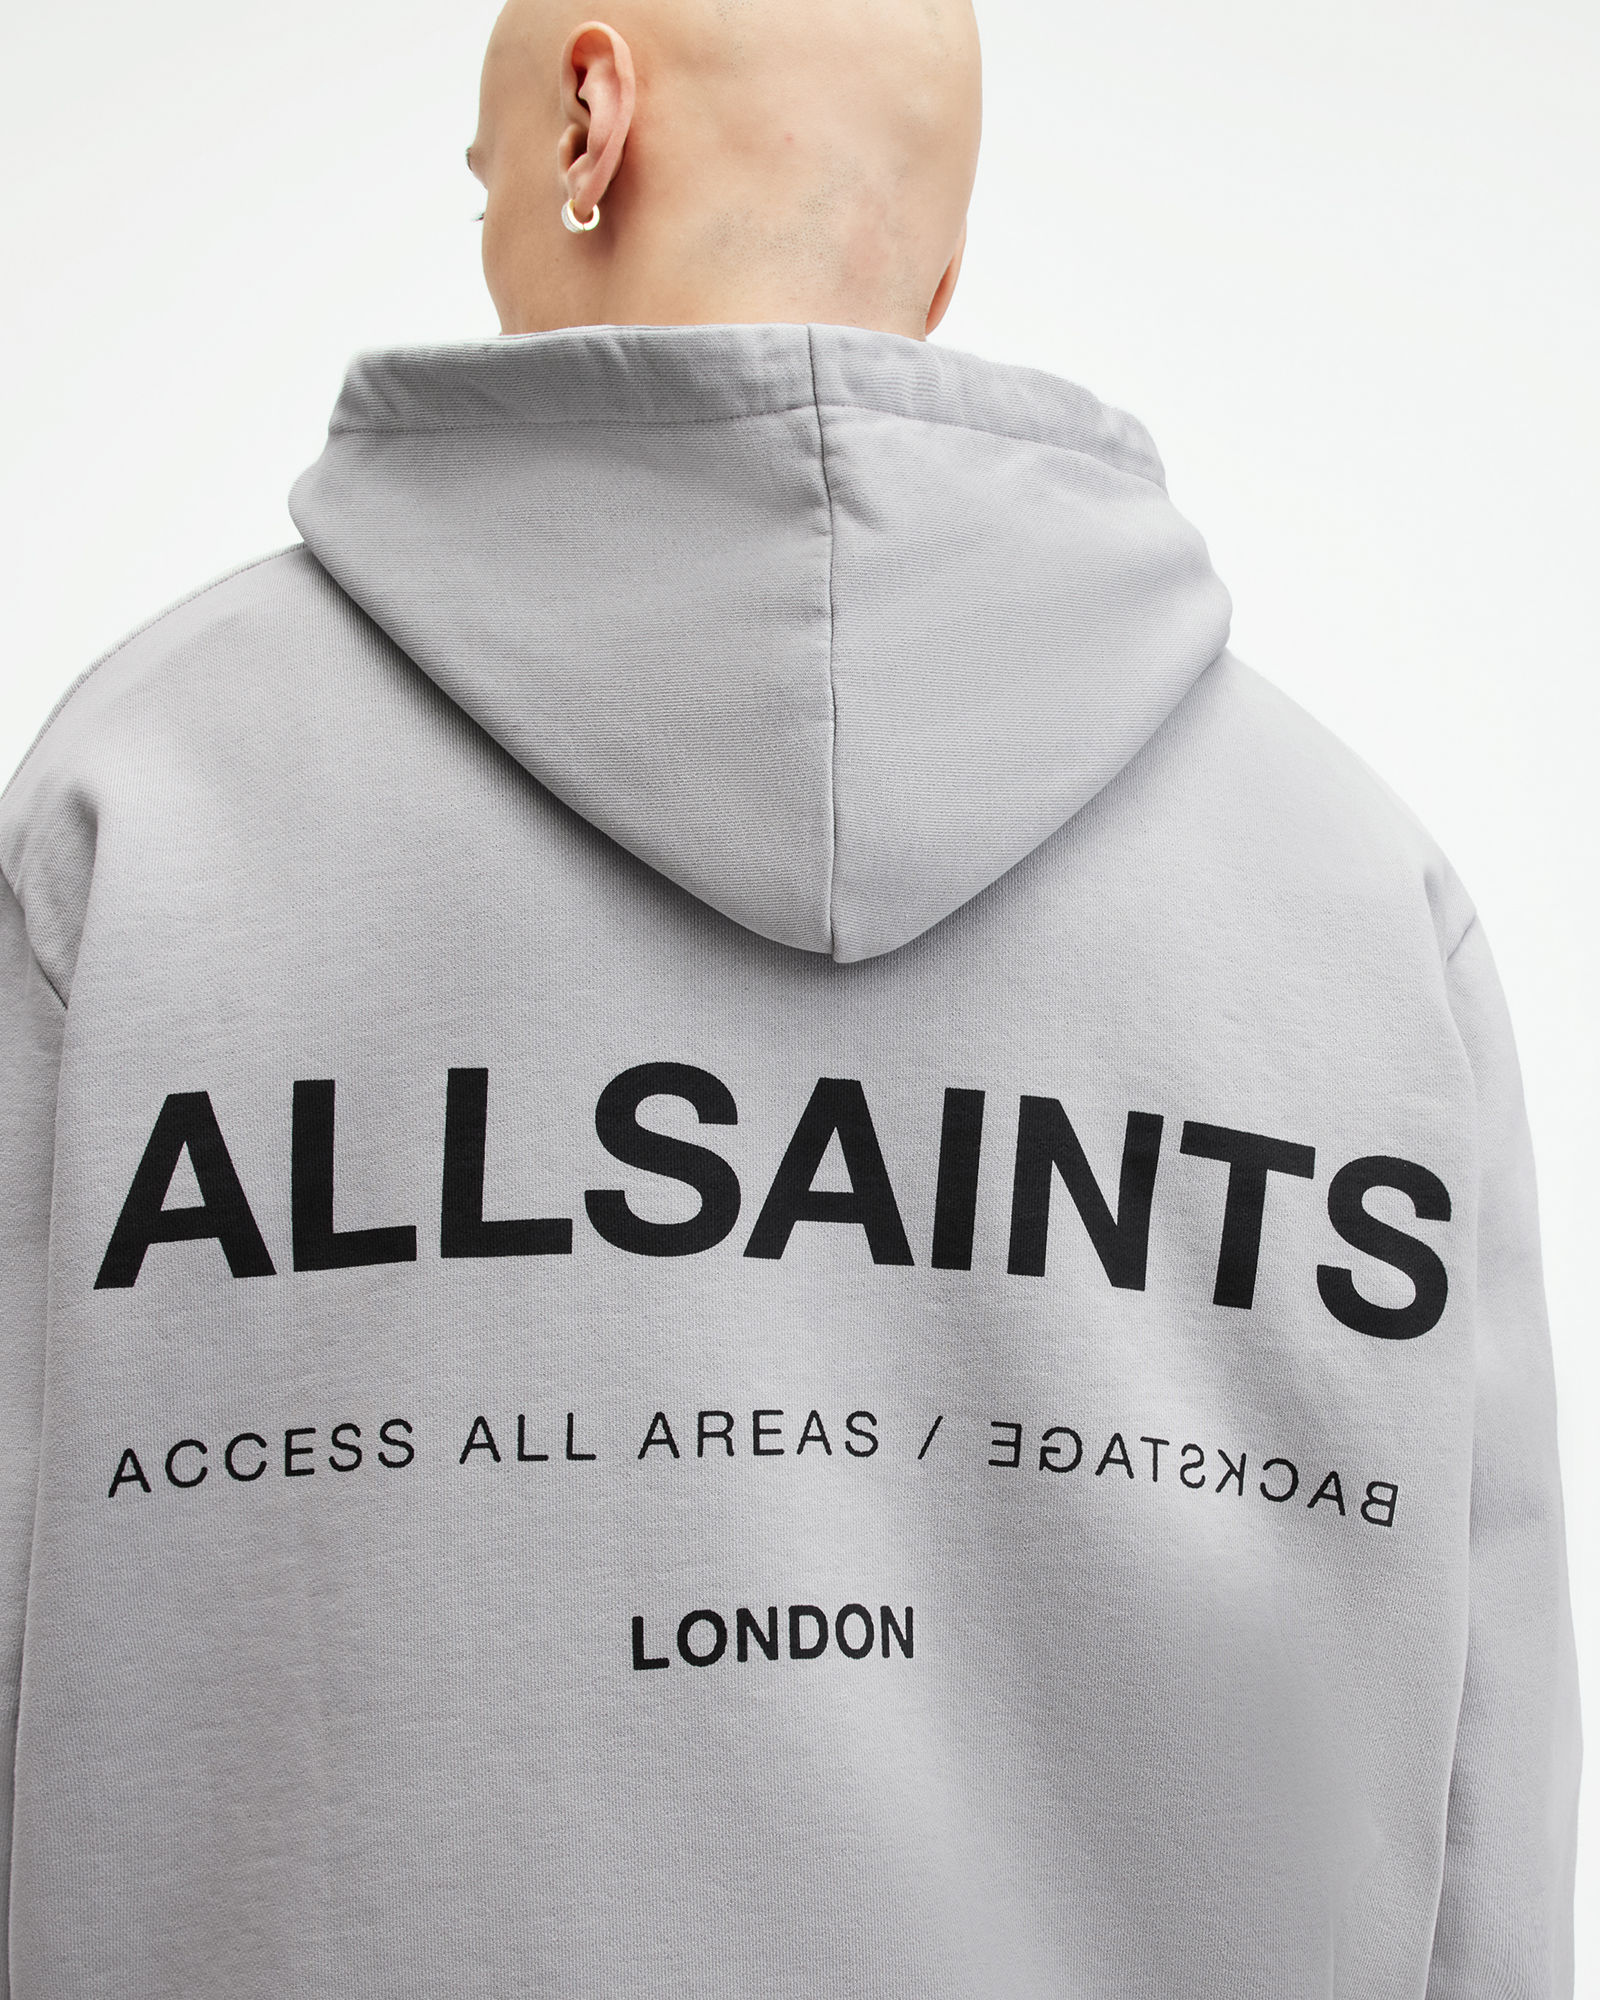 AllSaints Access Relaxed Fit Logo Hoodie,, SMOKEY GREY